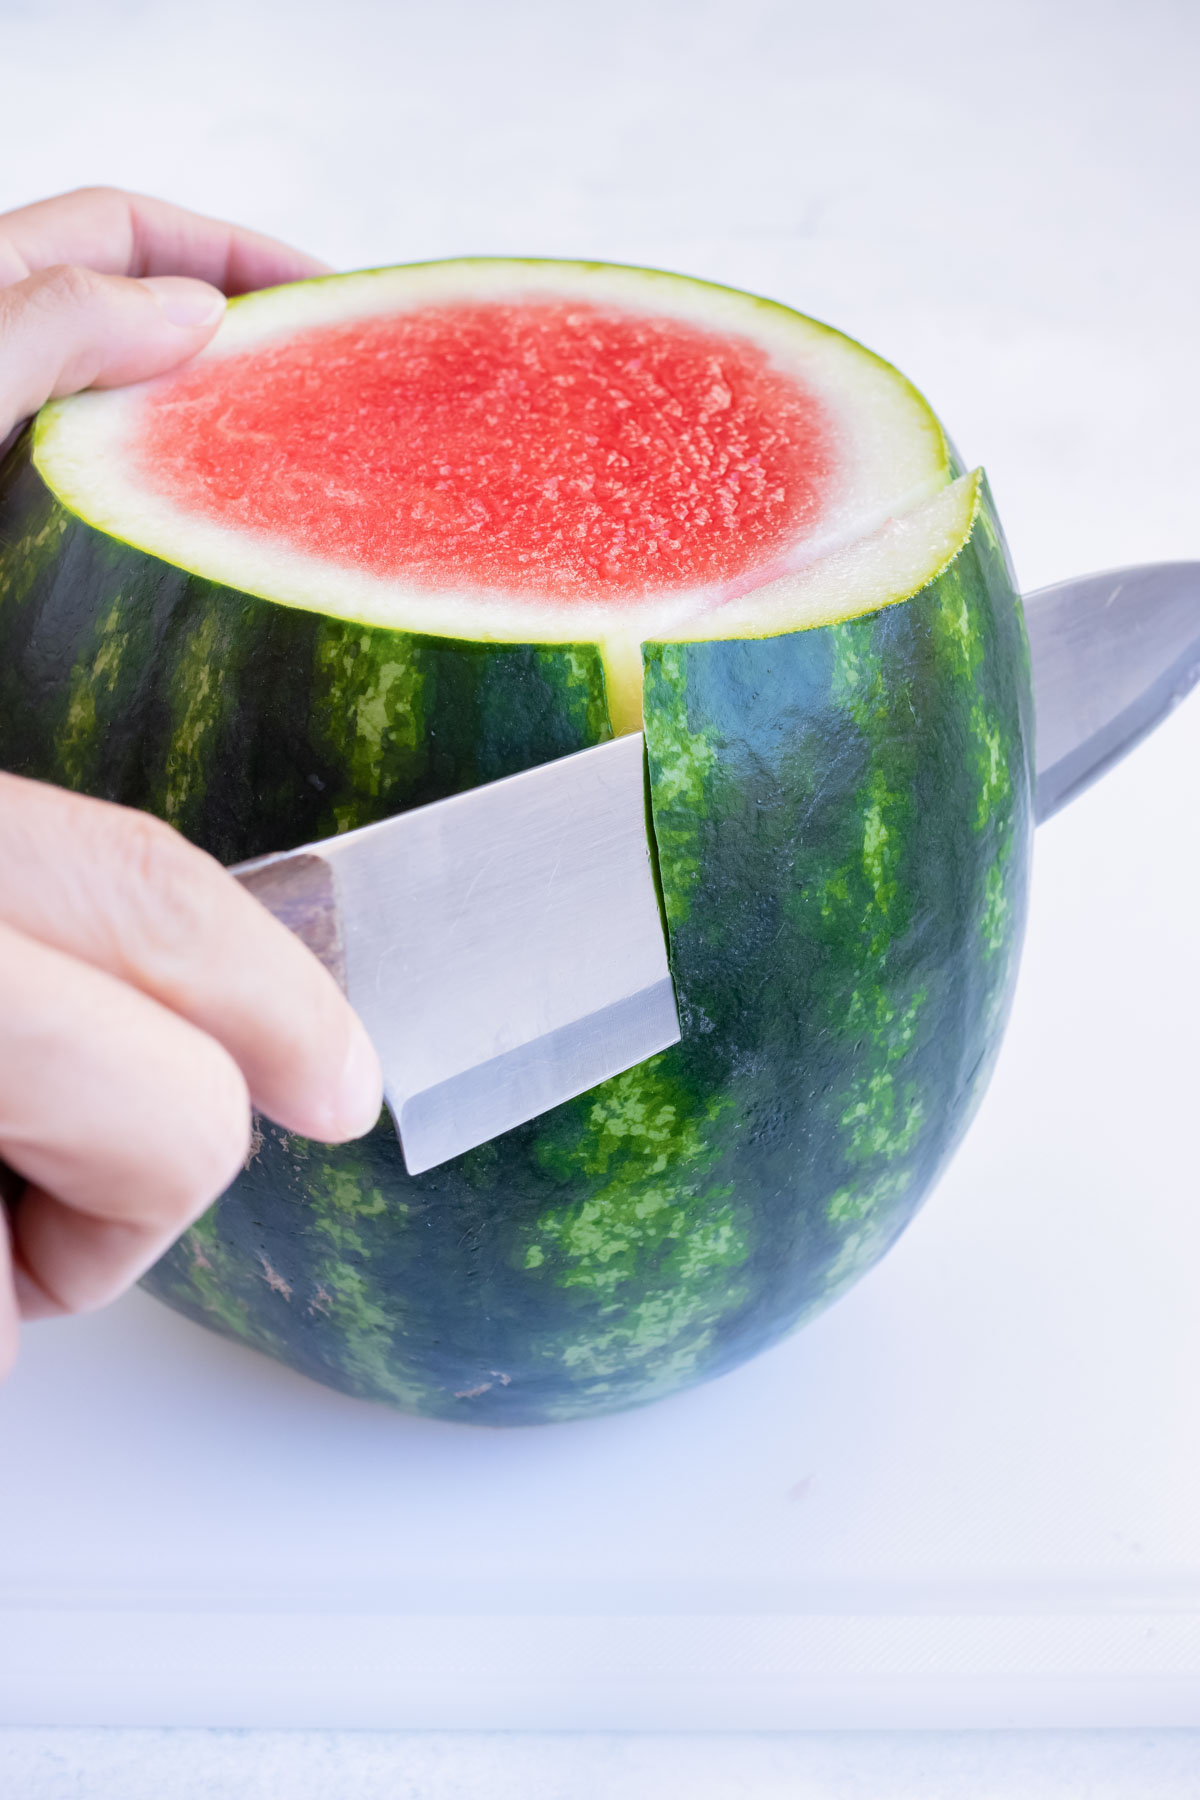 A sharp knife removing the green rind of a watermelon